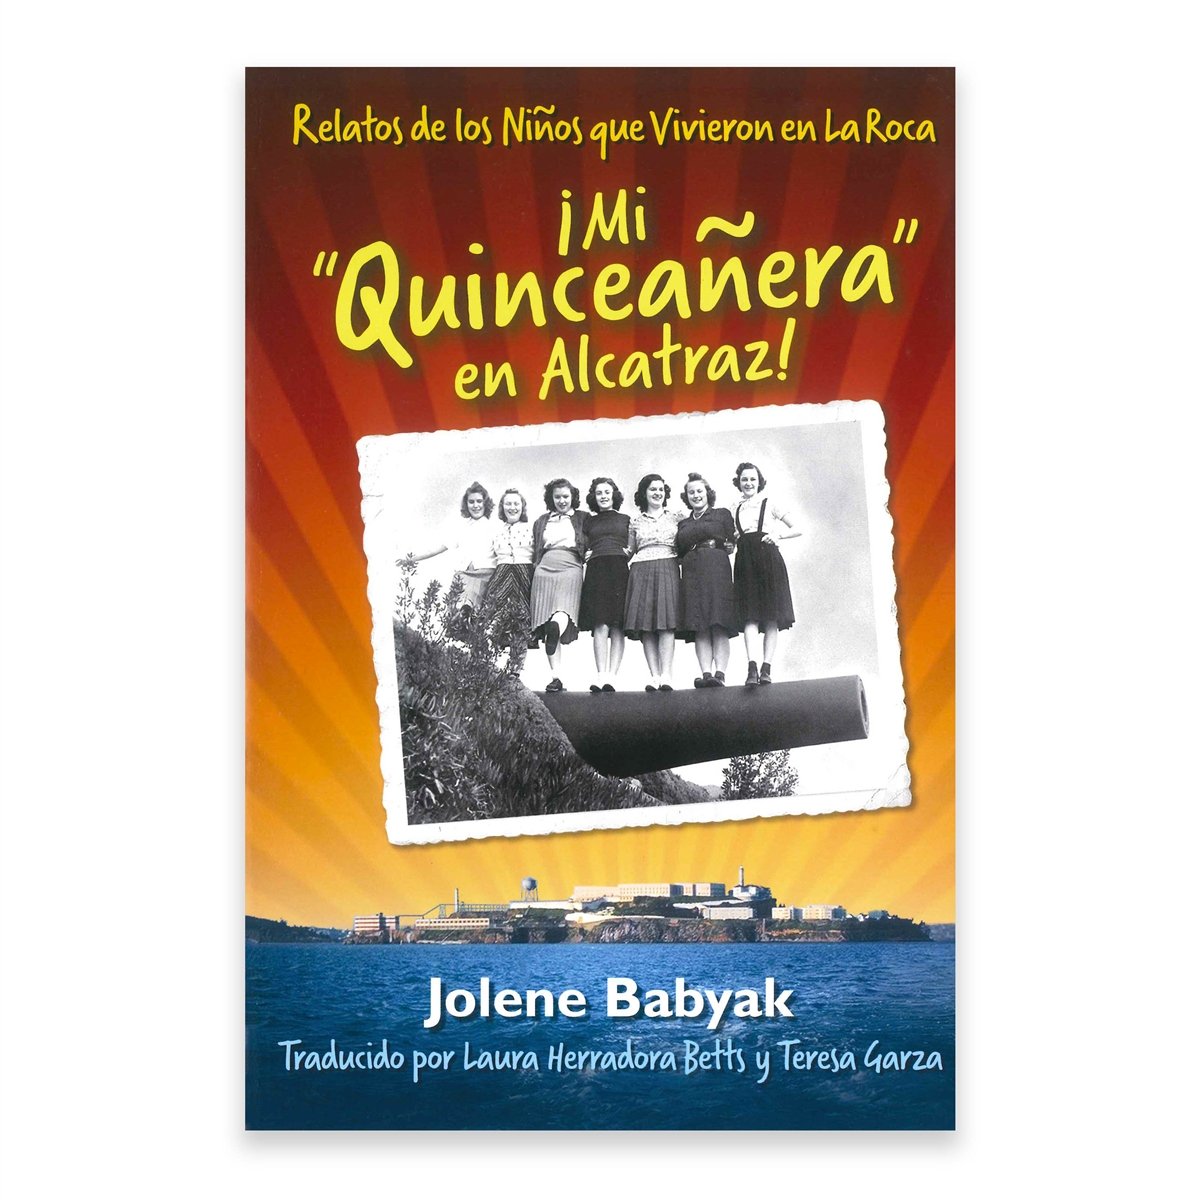 Colorful front cover of book Mi Quinceanera en Alcatraz by Jolene Babyak with photograph of girls standing on cannon.